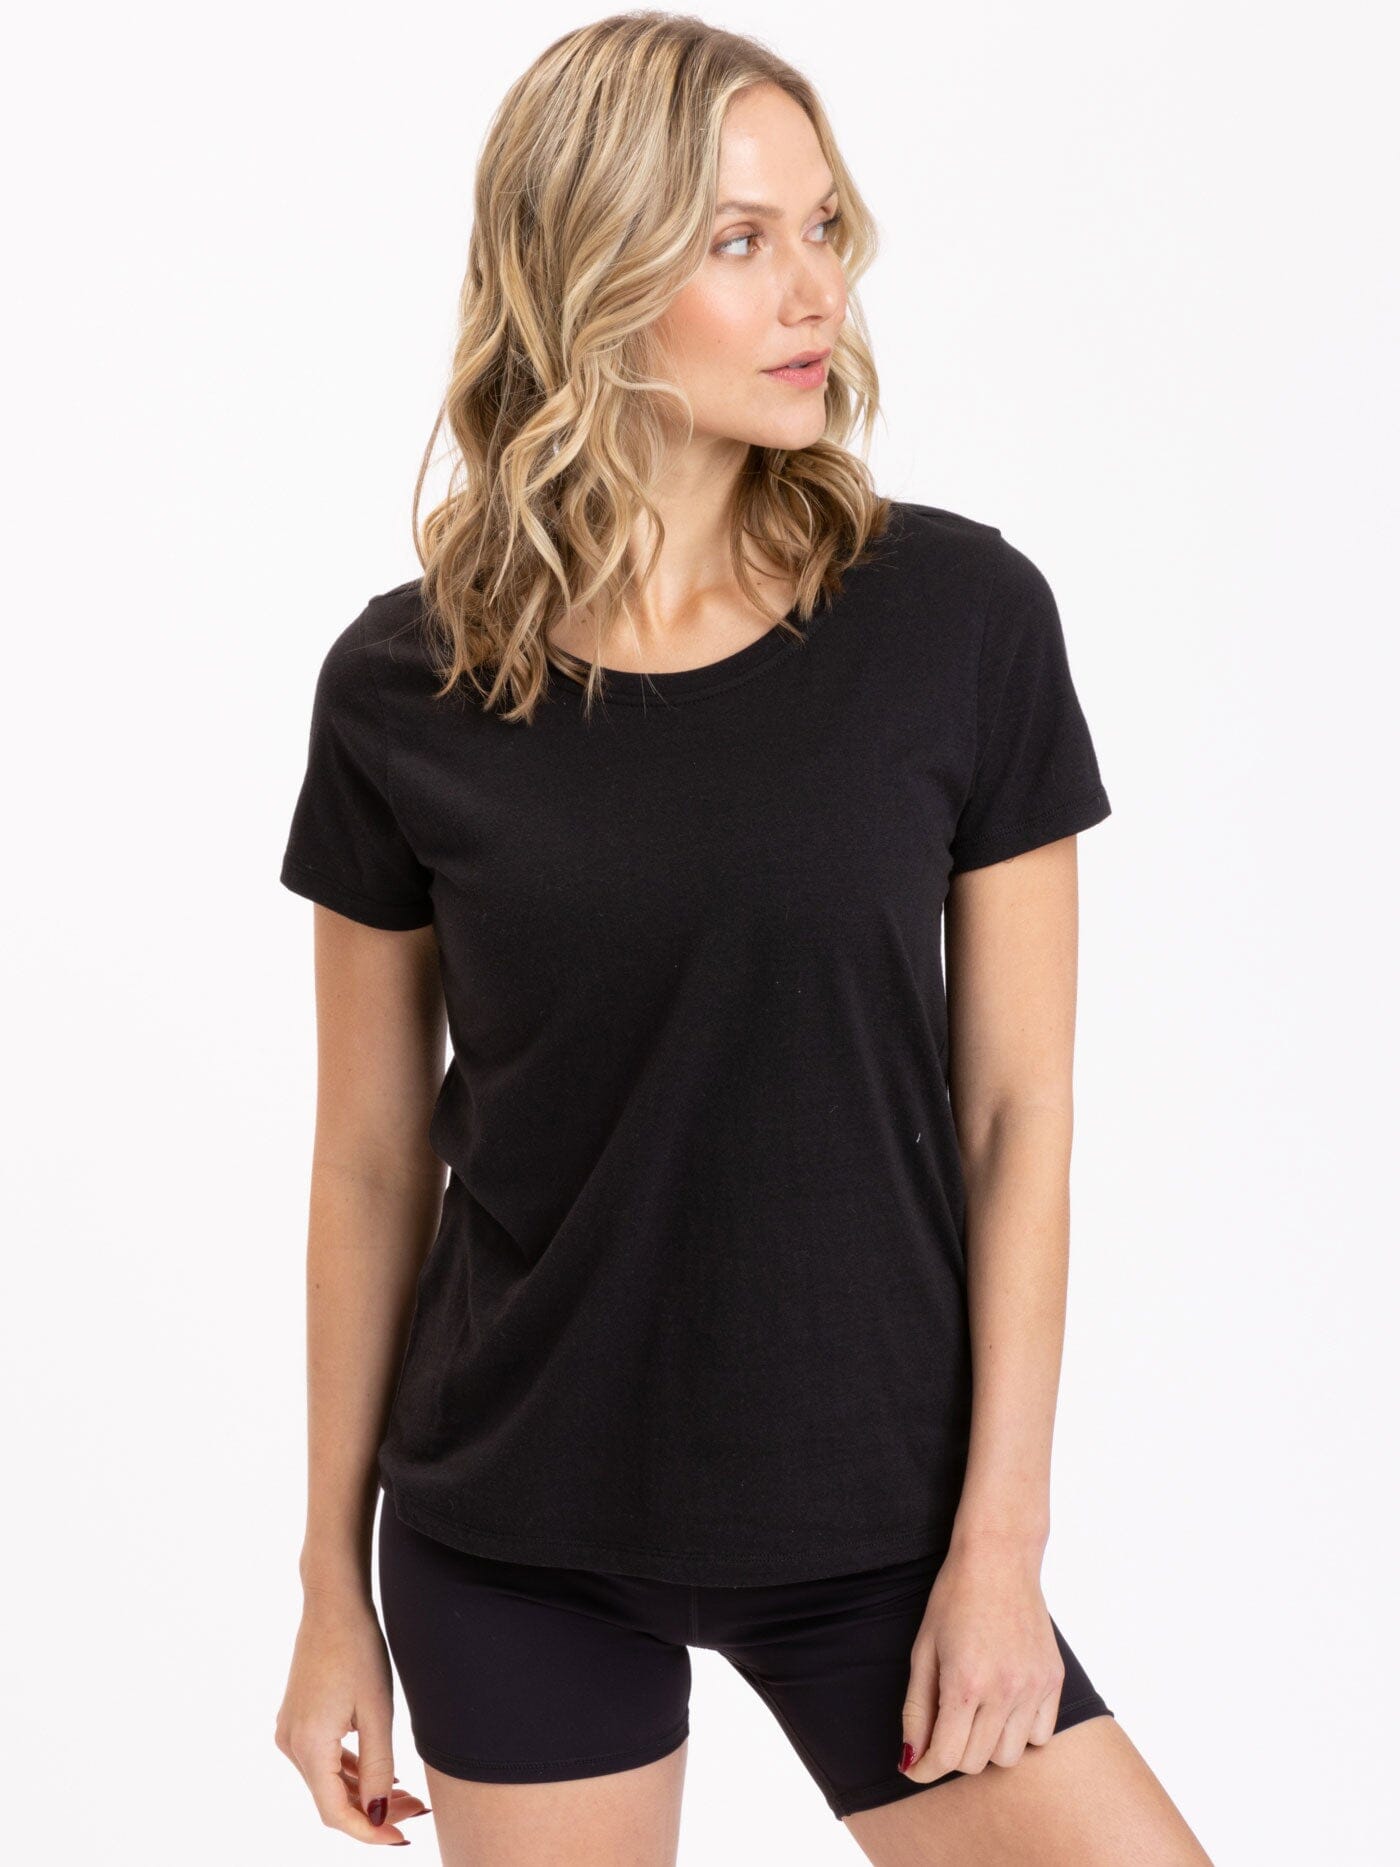 Women's Tees – Threads 4 Thought